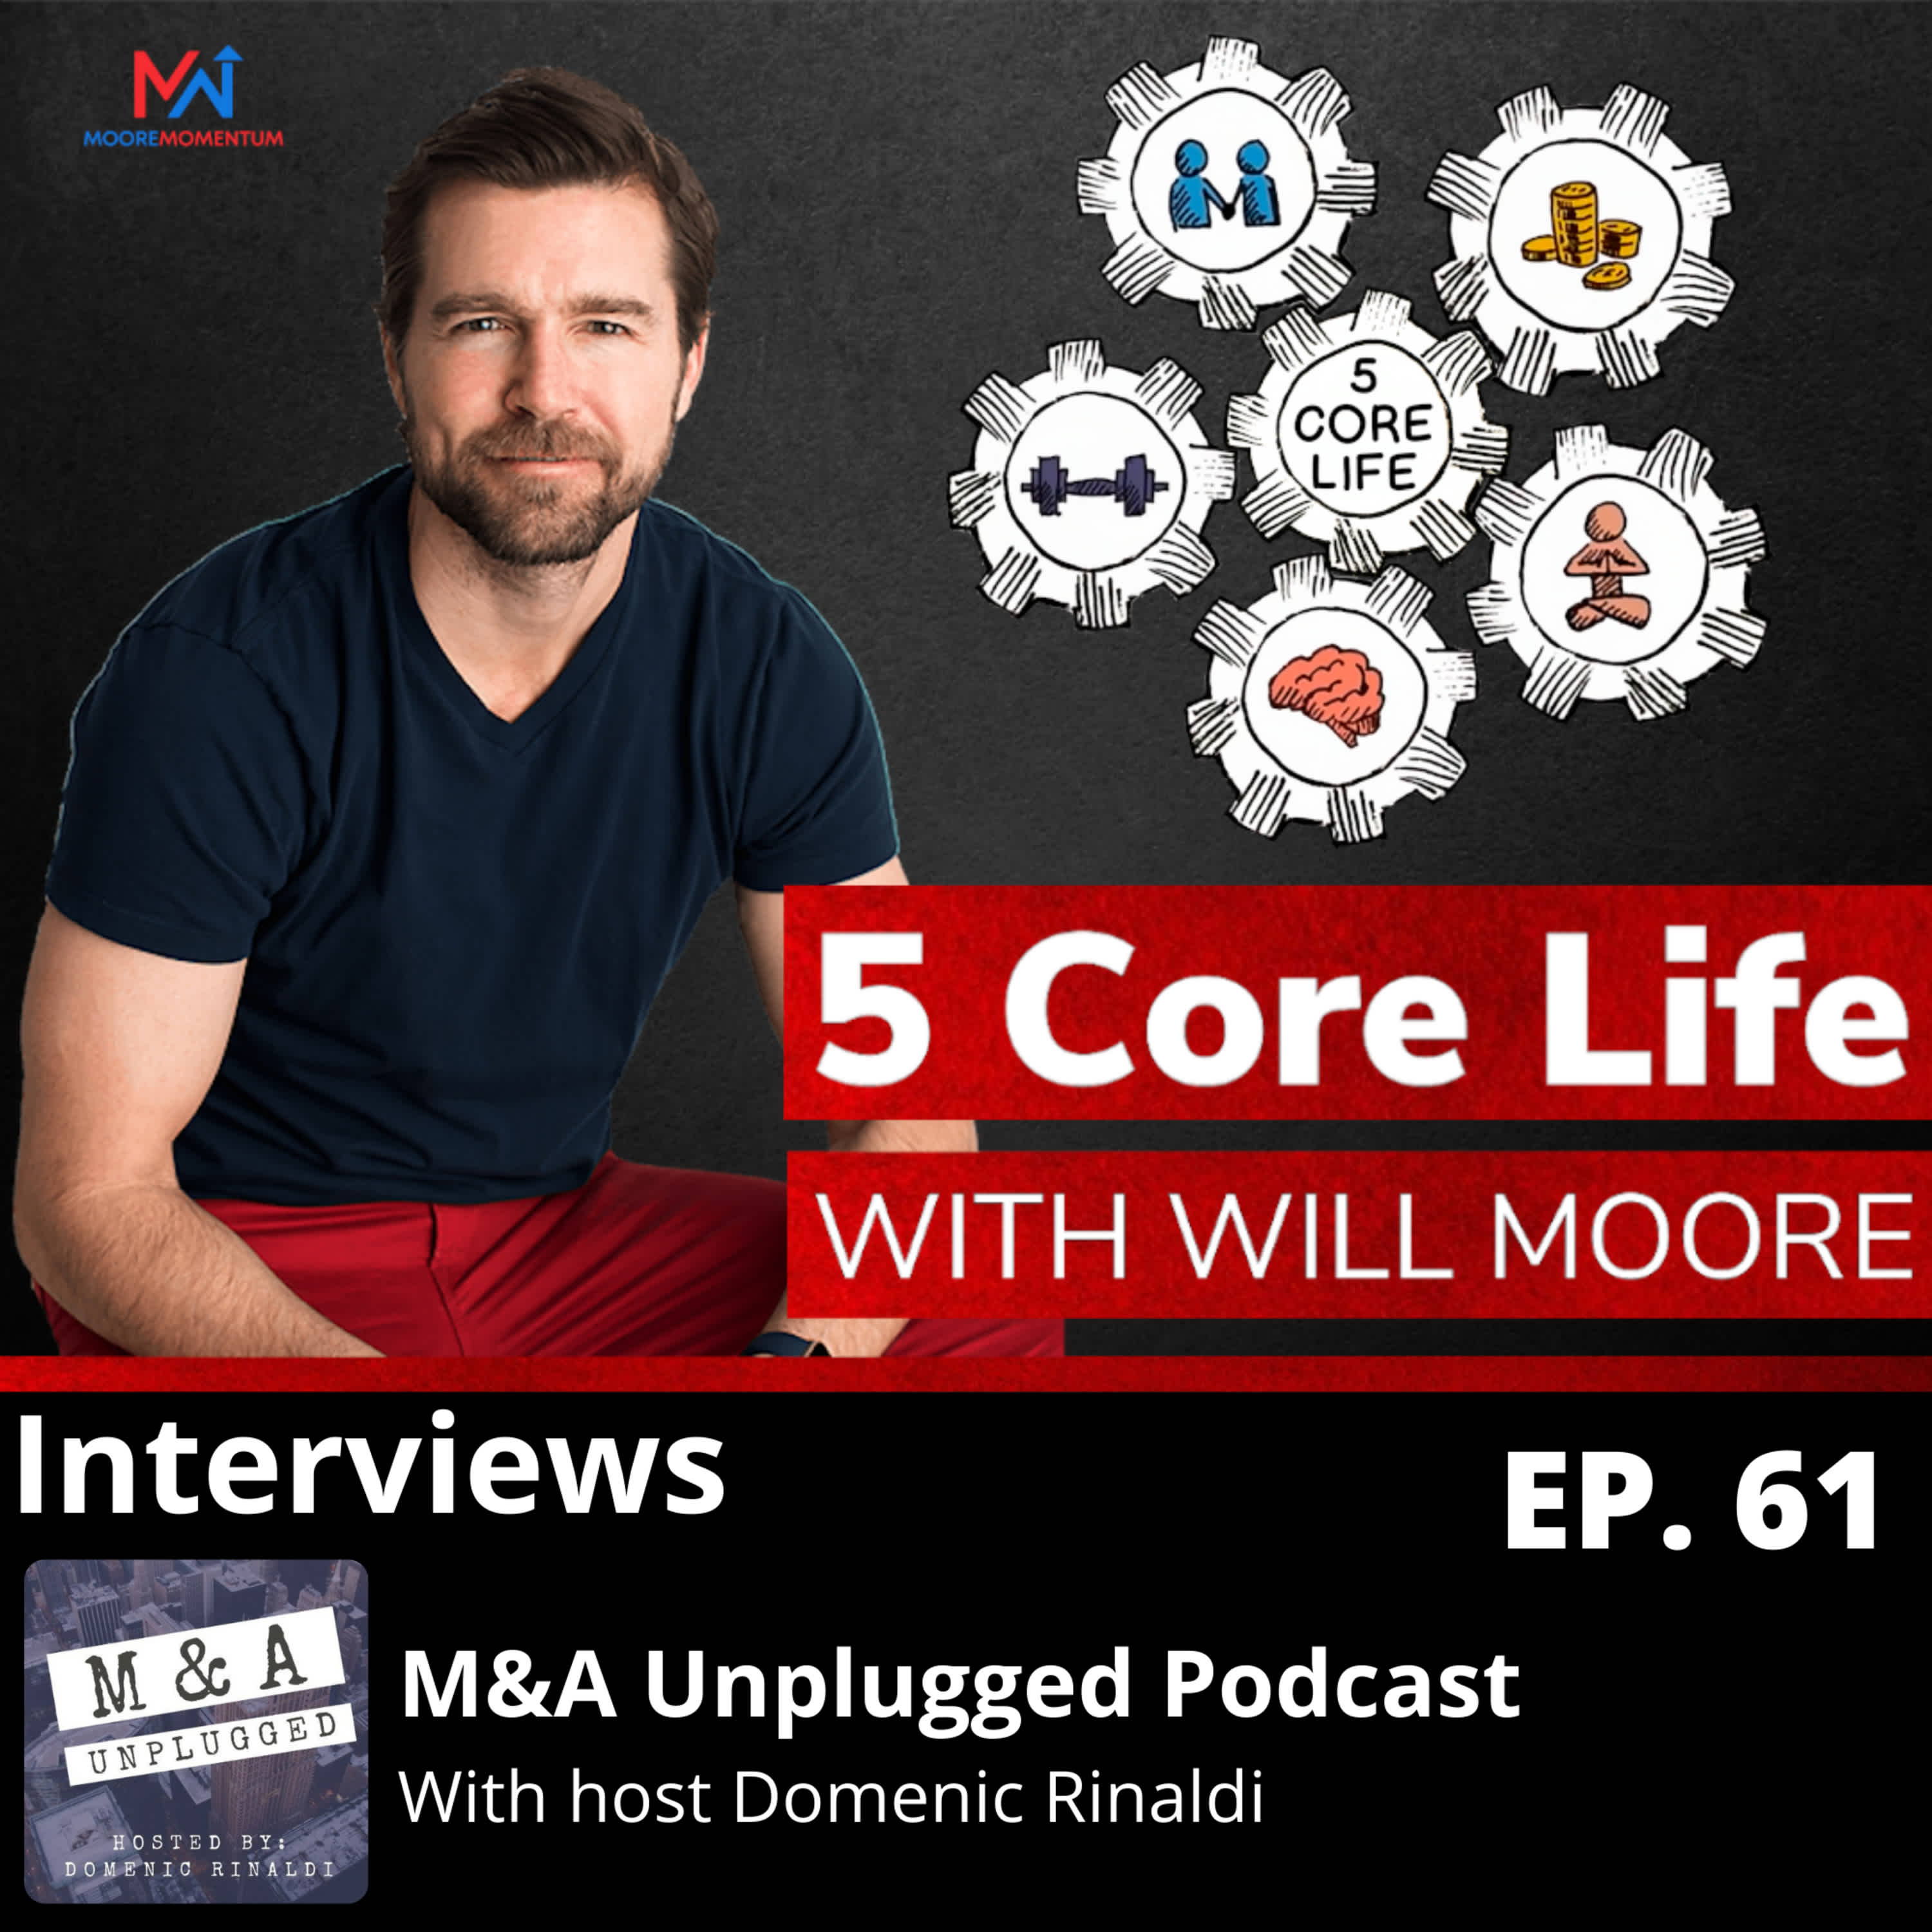 Preparing For The Sale | An Interview on the M&A Unplugged Podcast